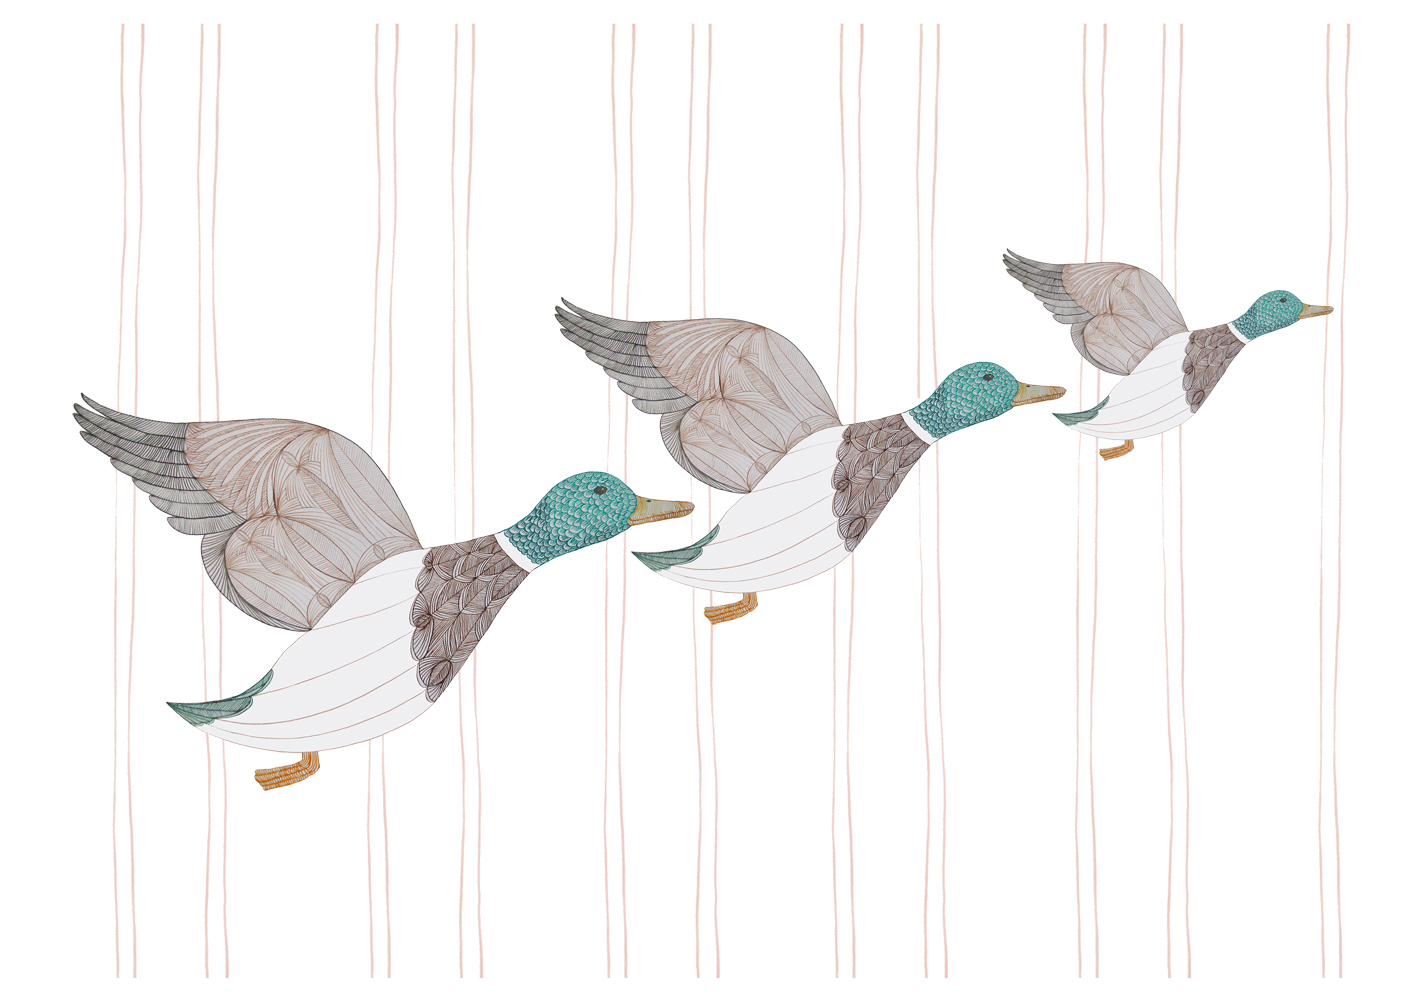 Flying Ducks Giclee Print of Pen and Ink Drawing